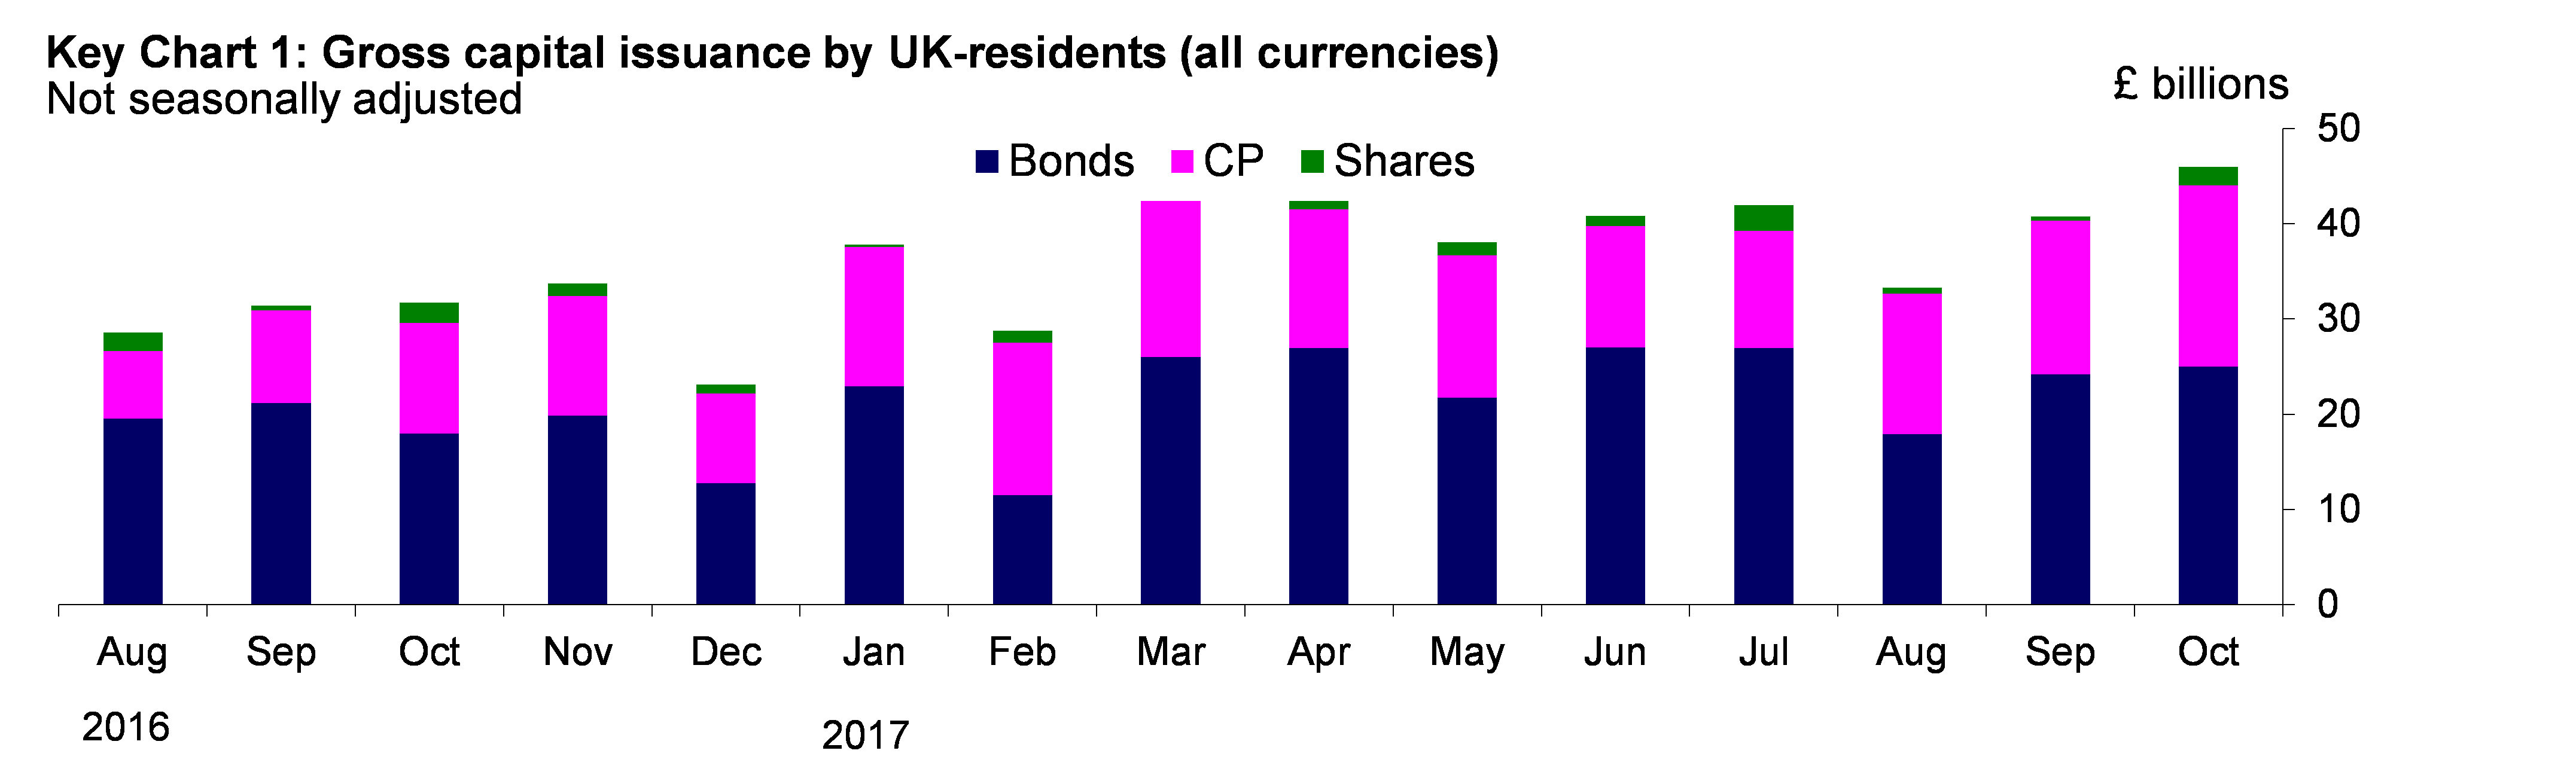 Key chart 1: Gross capital issuance by UK-residents (all currencies)